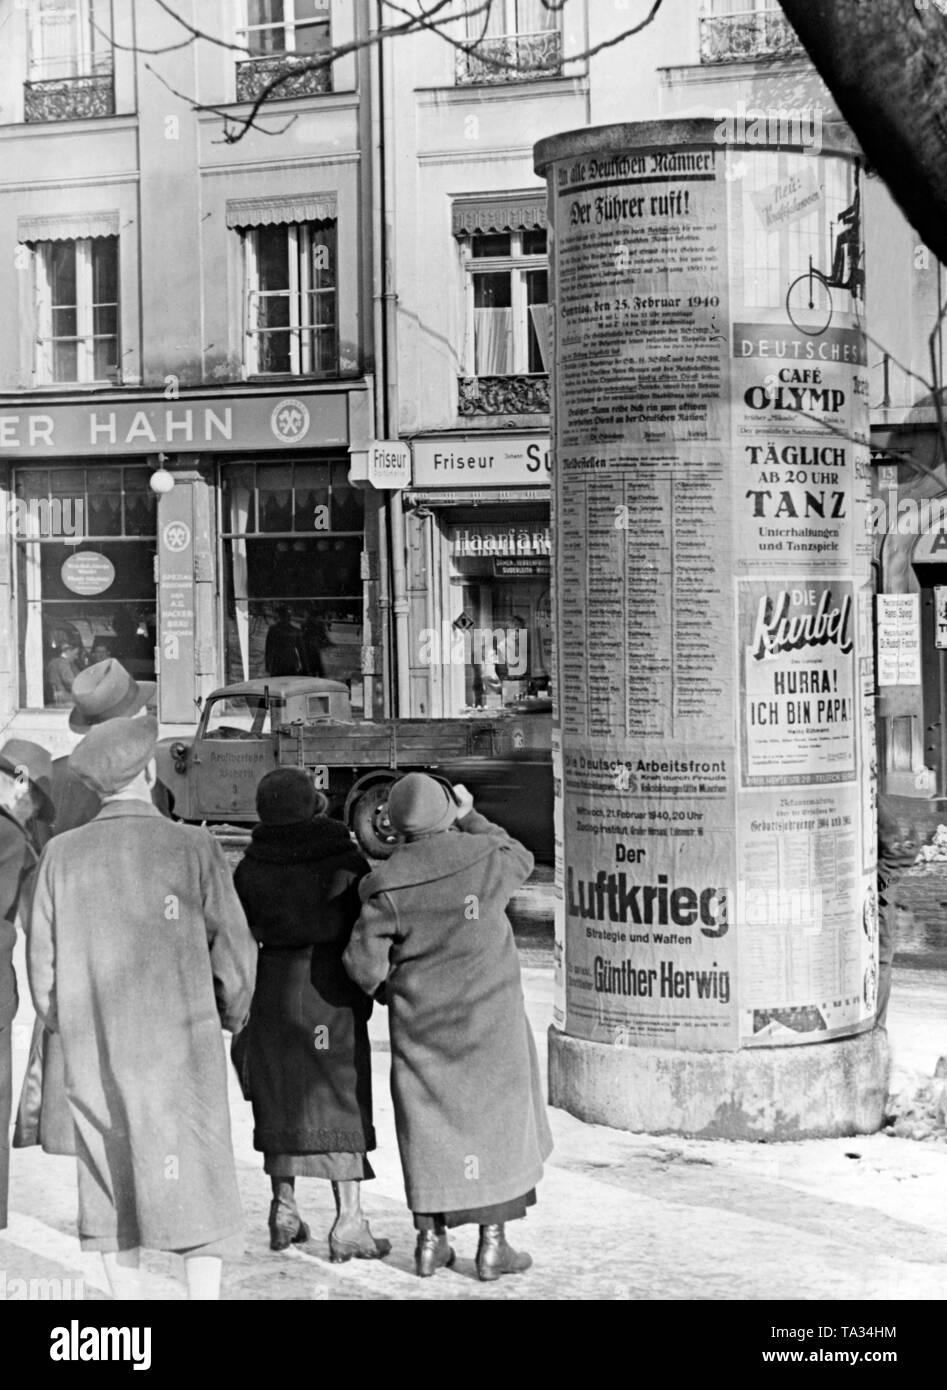 Passers-by observe the propaganda posters on an advertising column in a Bavarian city, probably Munich. A propaganda poster is entitled 'Der Fuehrer ruft' ('The Fuehrer is calling') and declares the mobilization of the year 1922. Another poster of the German Labor Front (DAF) announces the lecture of Guenther Herwig 'Der Luftkrieg Strategie und Waffen' ('The air war strategy and weapons'). Stock Photo